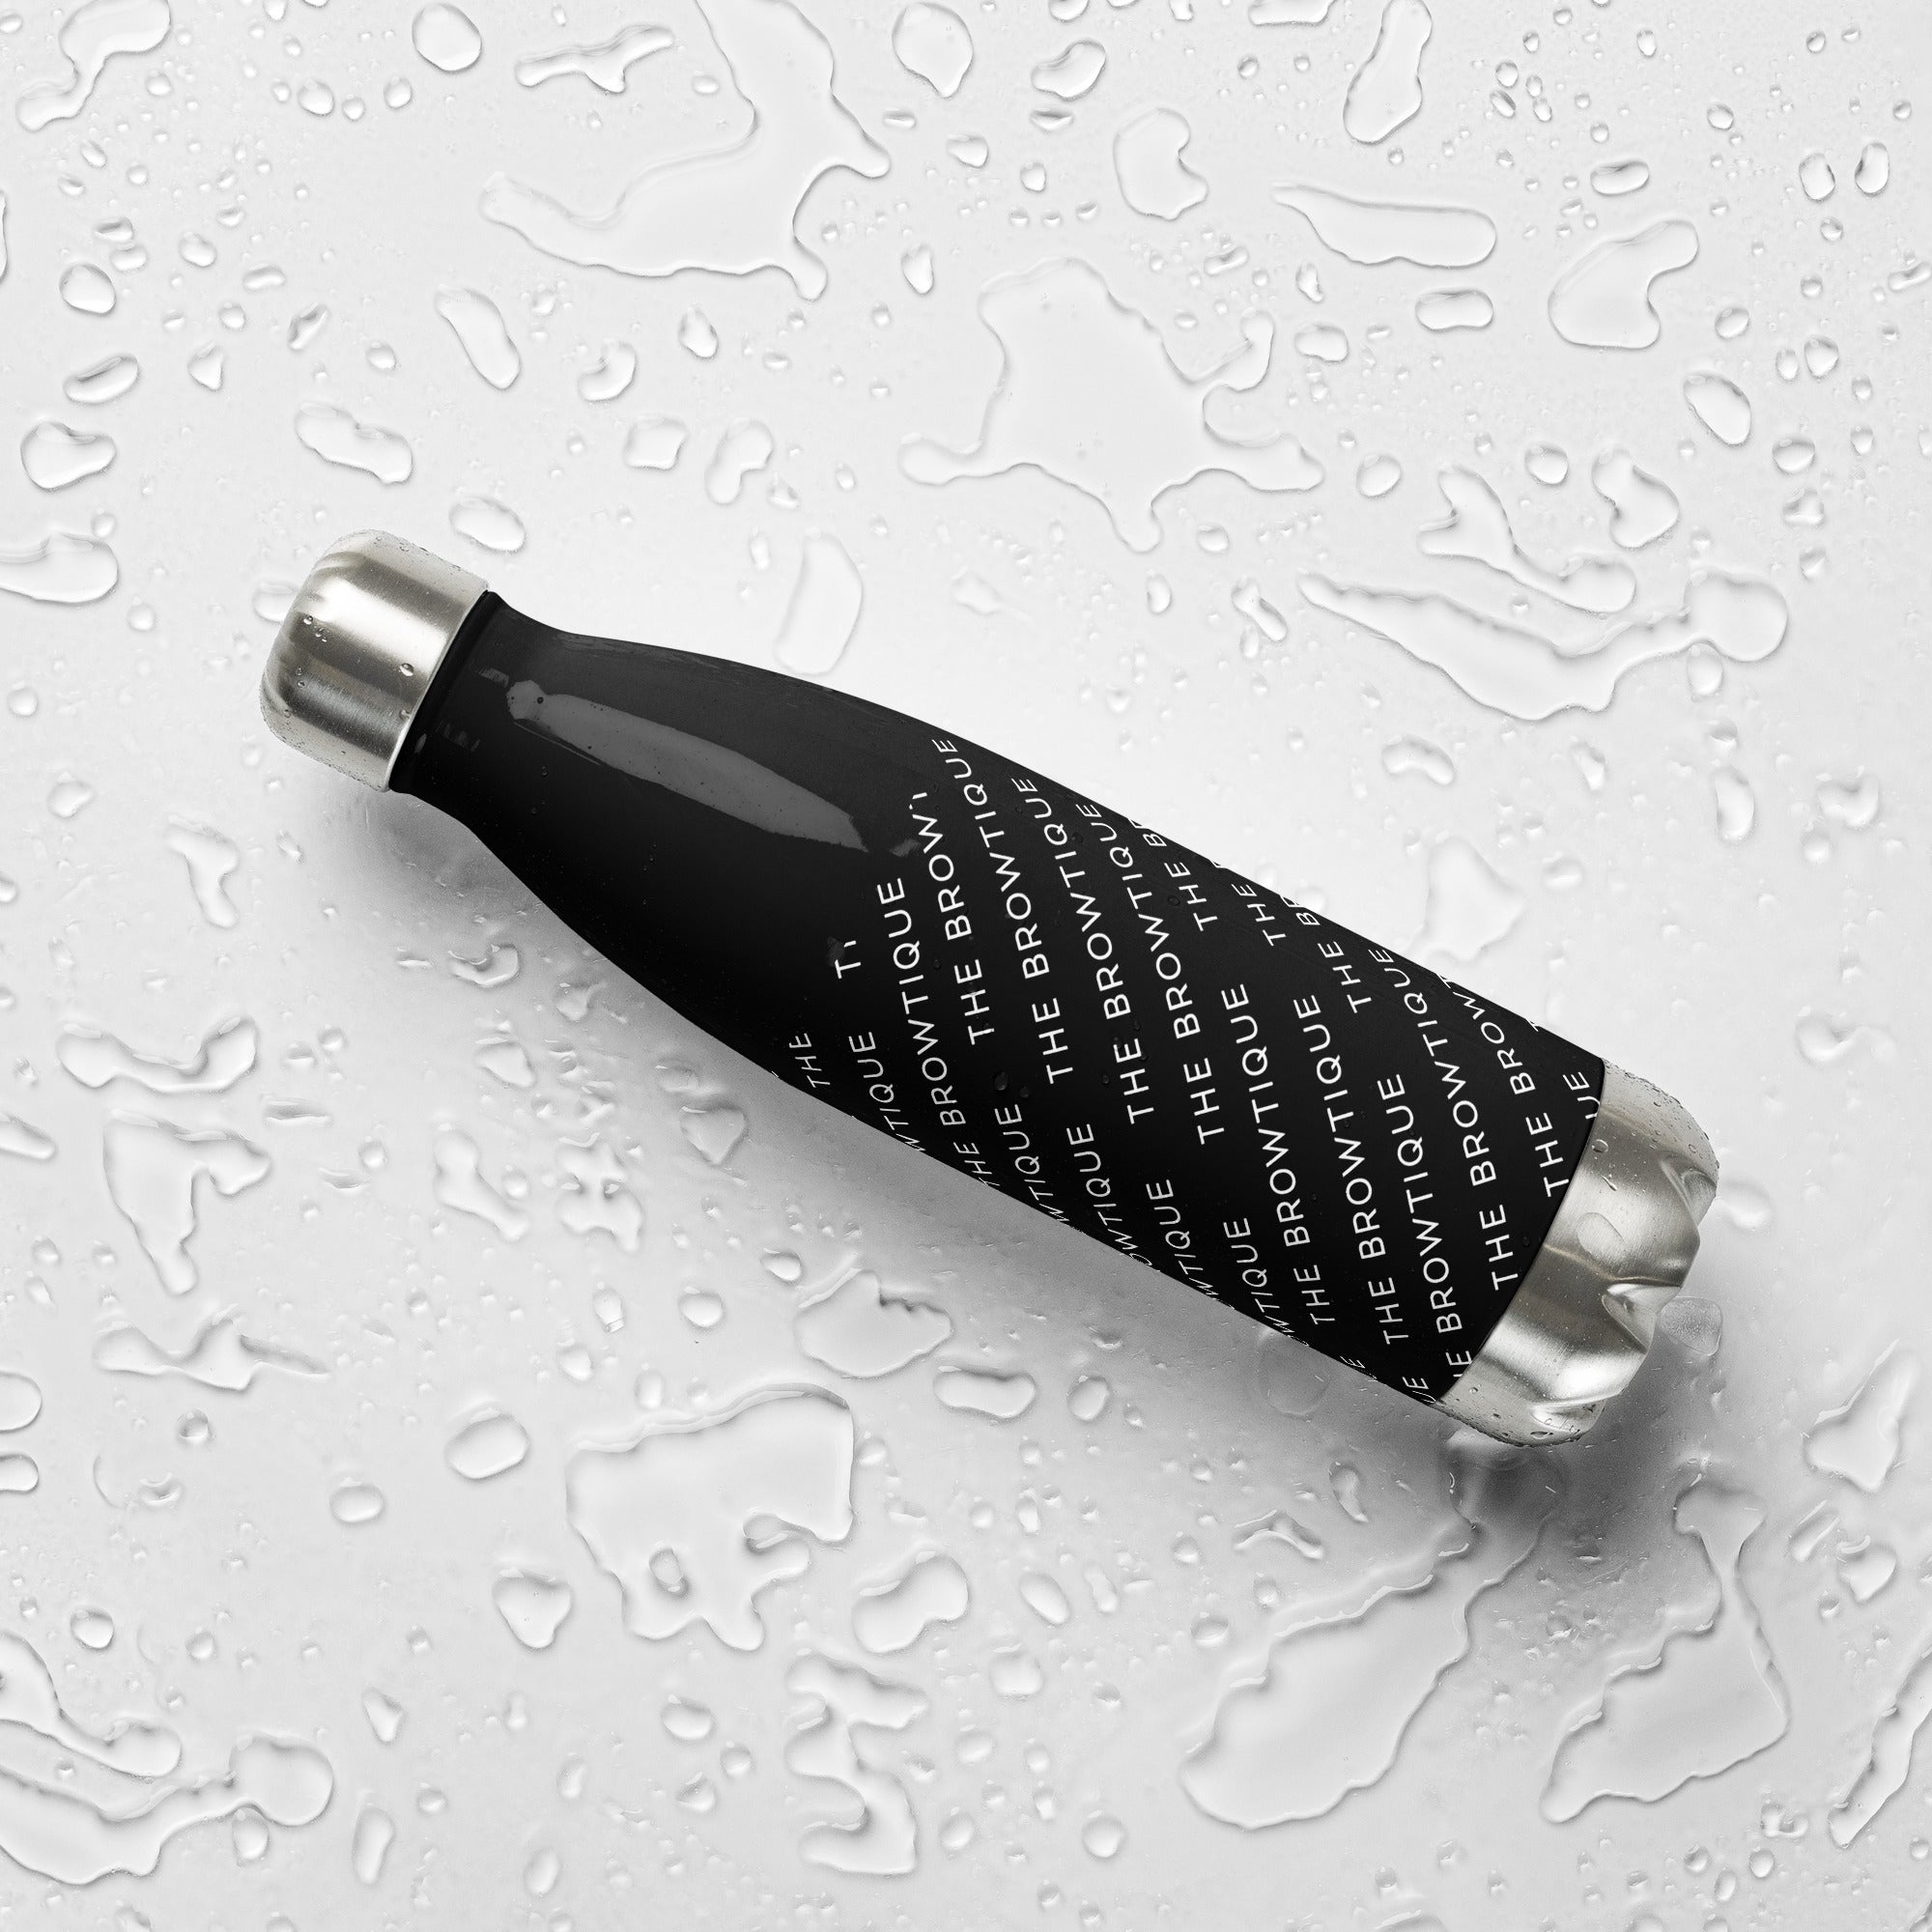 The Browtique Stainless steel water bottle